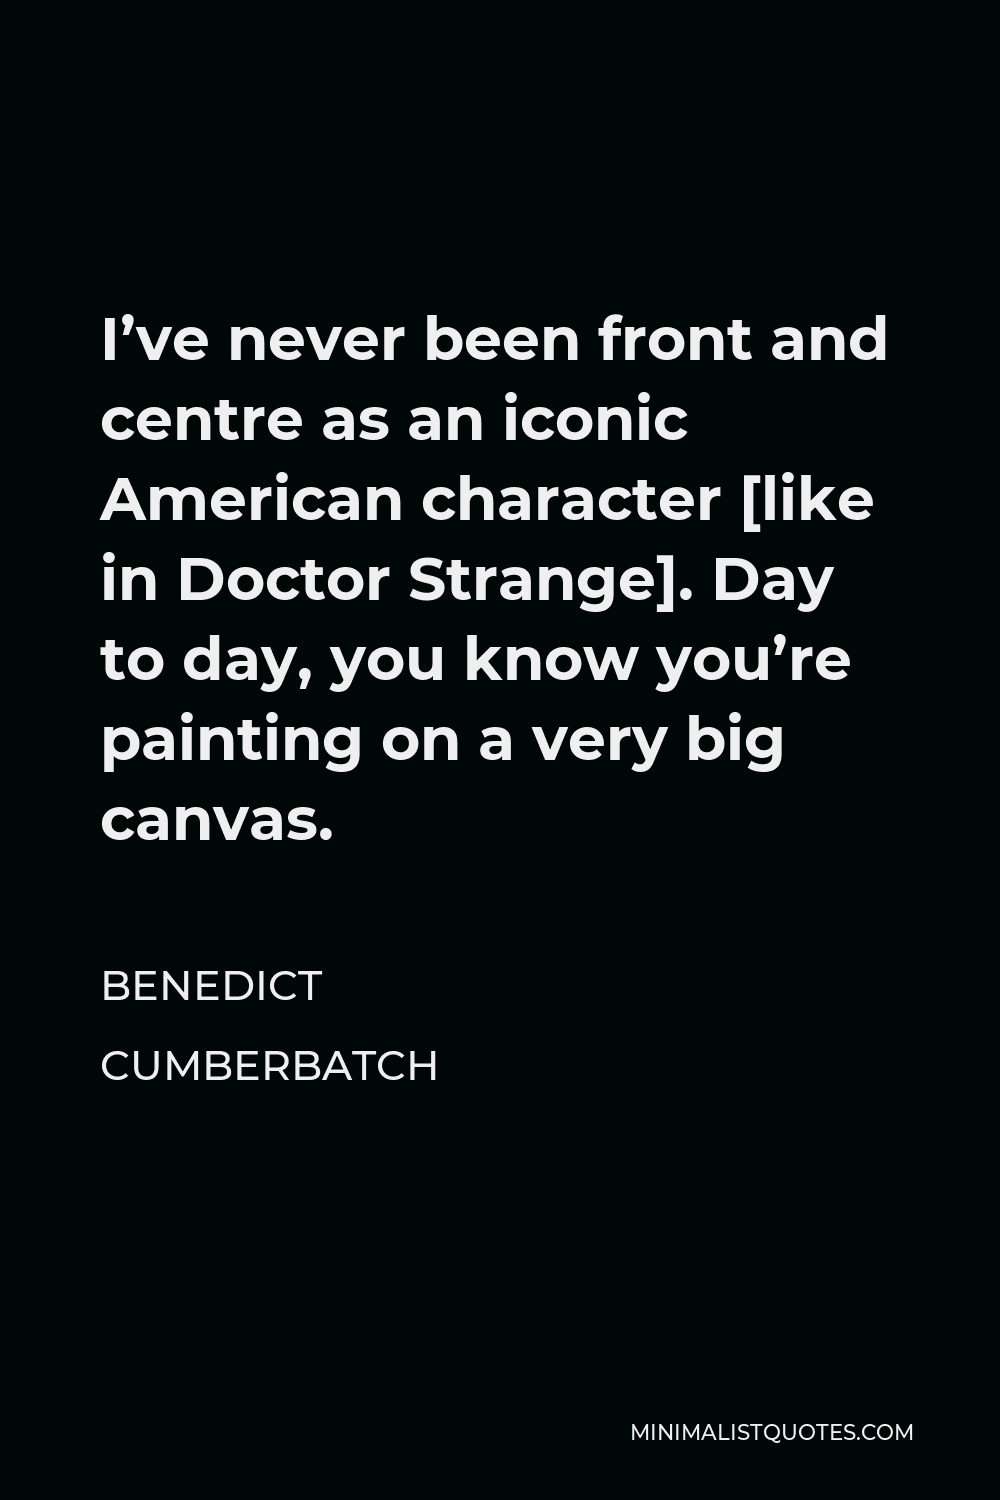 Benedict Cumberbatch Quote - I’ve never been front and centre as an iconic American character [like in Doctor Strange]. Day to day, you know you’re painting on a very big canvas.